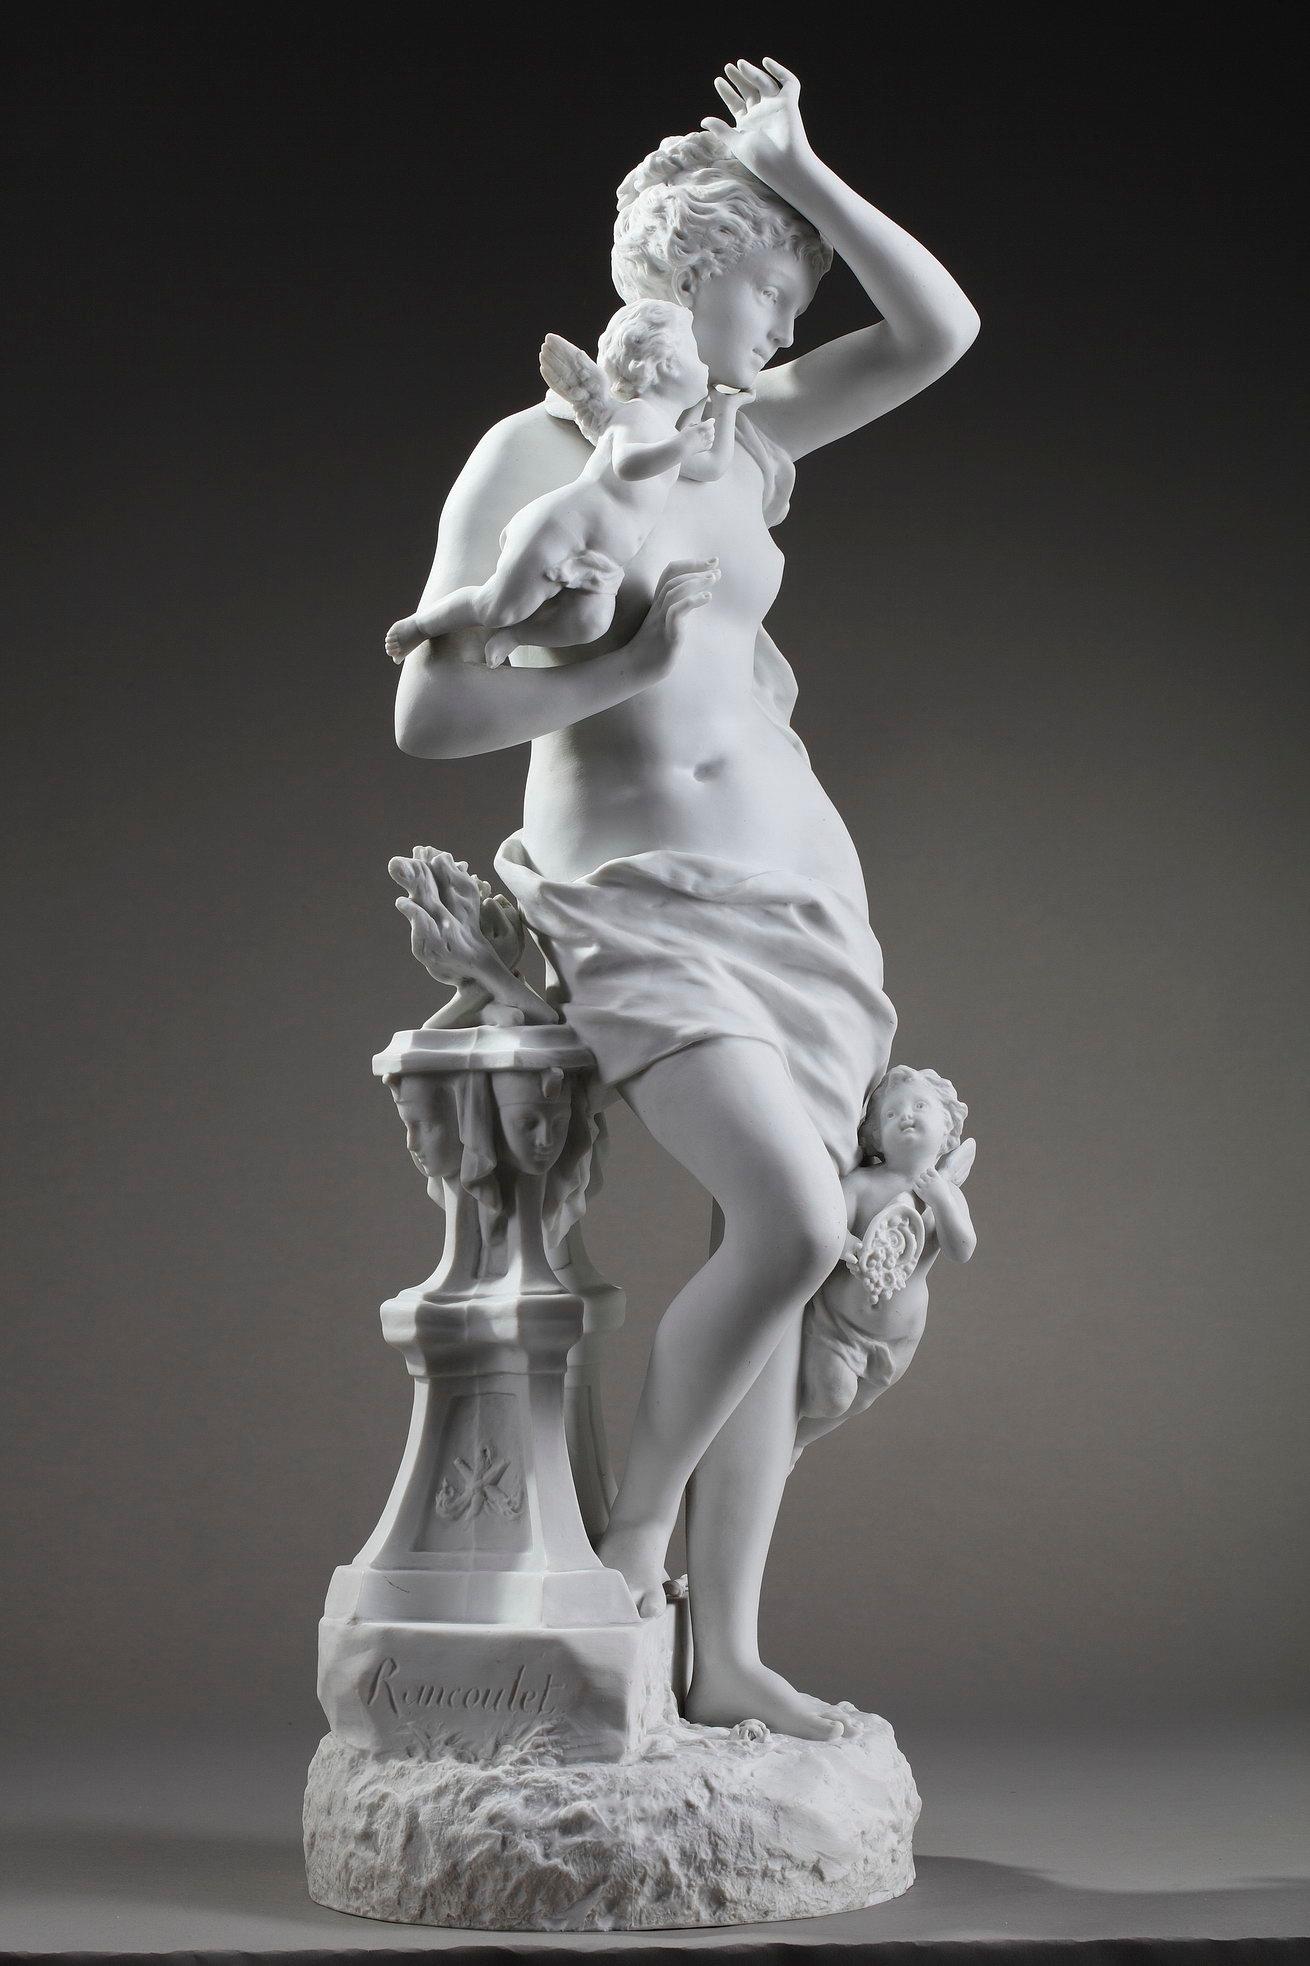 19th Century Bisque Porcelain Figurine: Venus with Cupids by Ernest Rancoulet